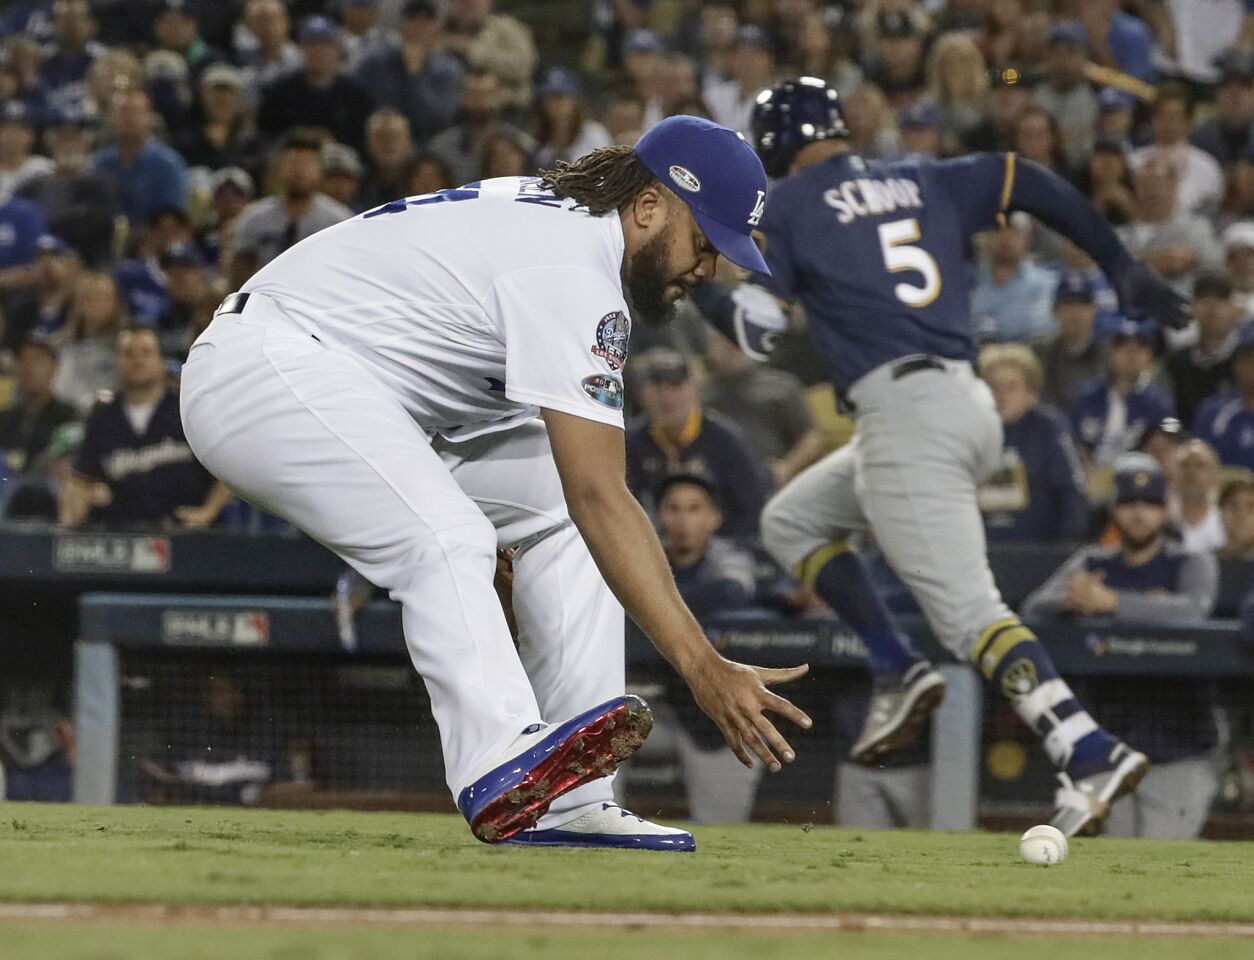 Dodgers pitcher Kenley Jansen rushes to field a short hit ball and throw out Brewers second baseman Jonathan Schoop in the ninth inning.